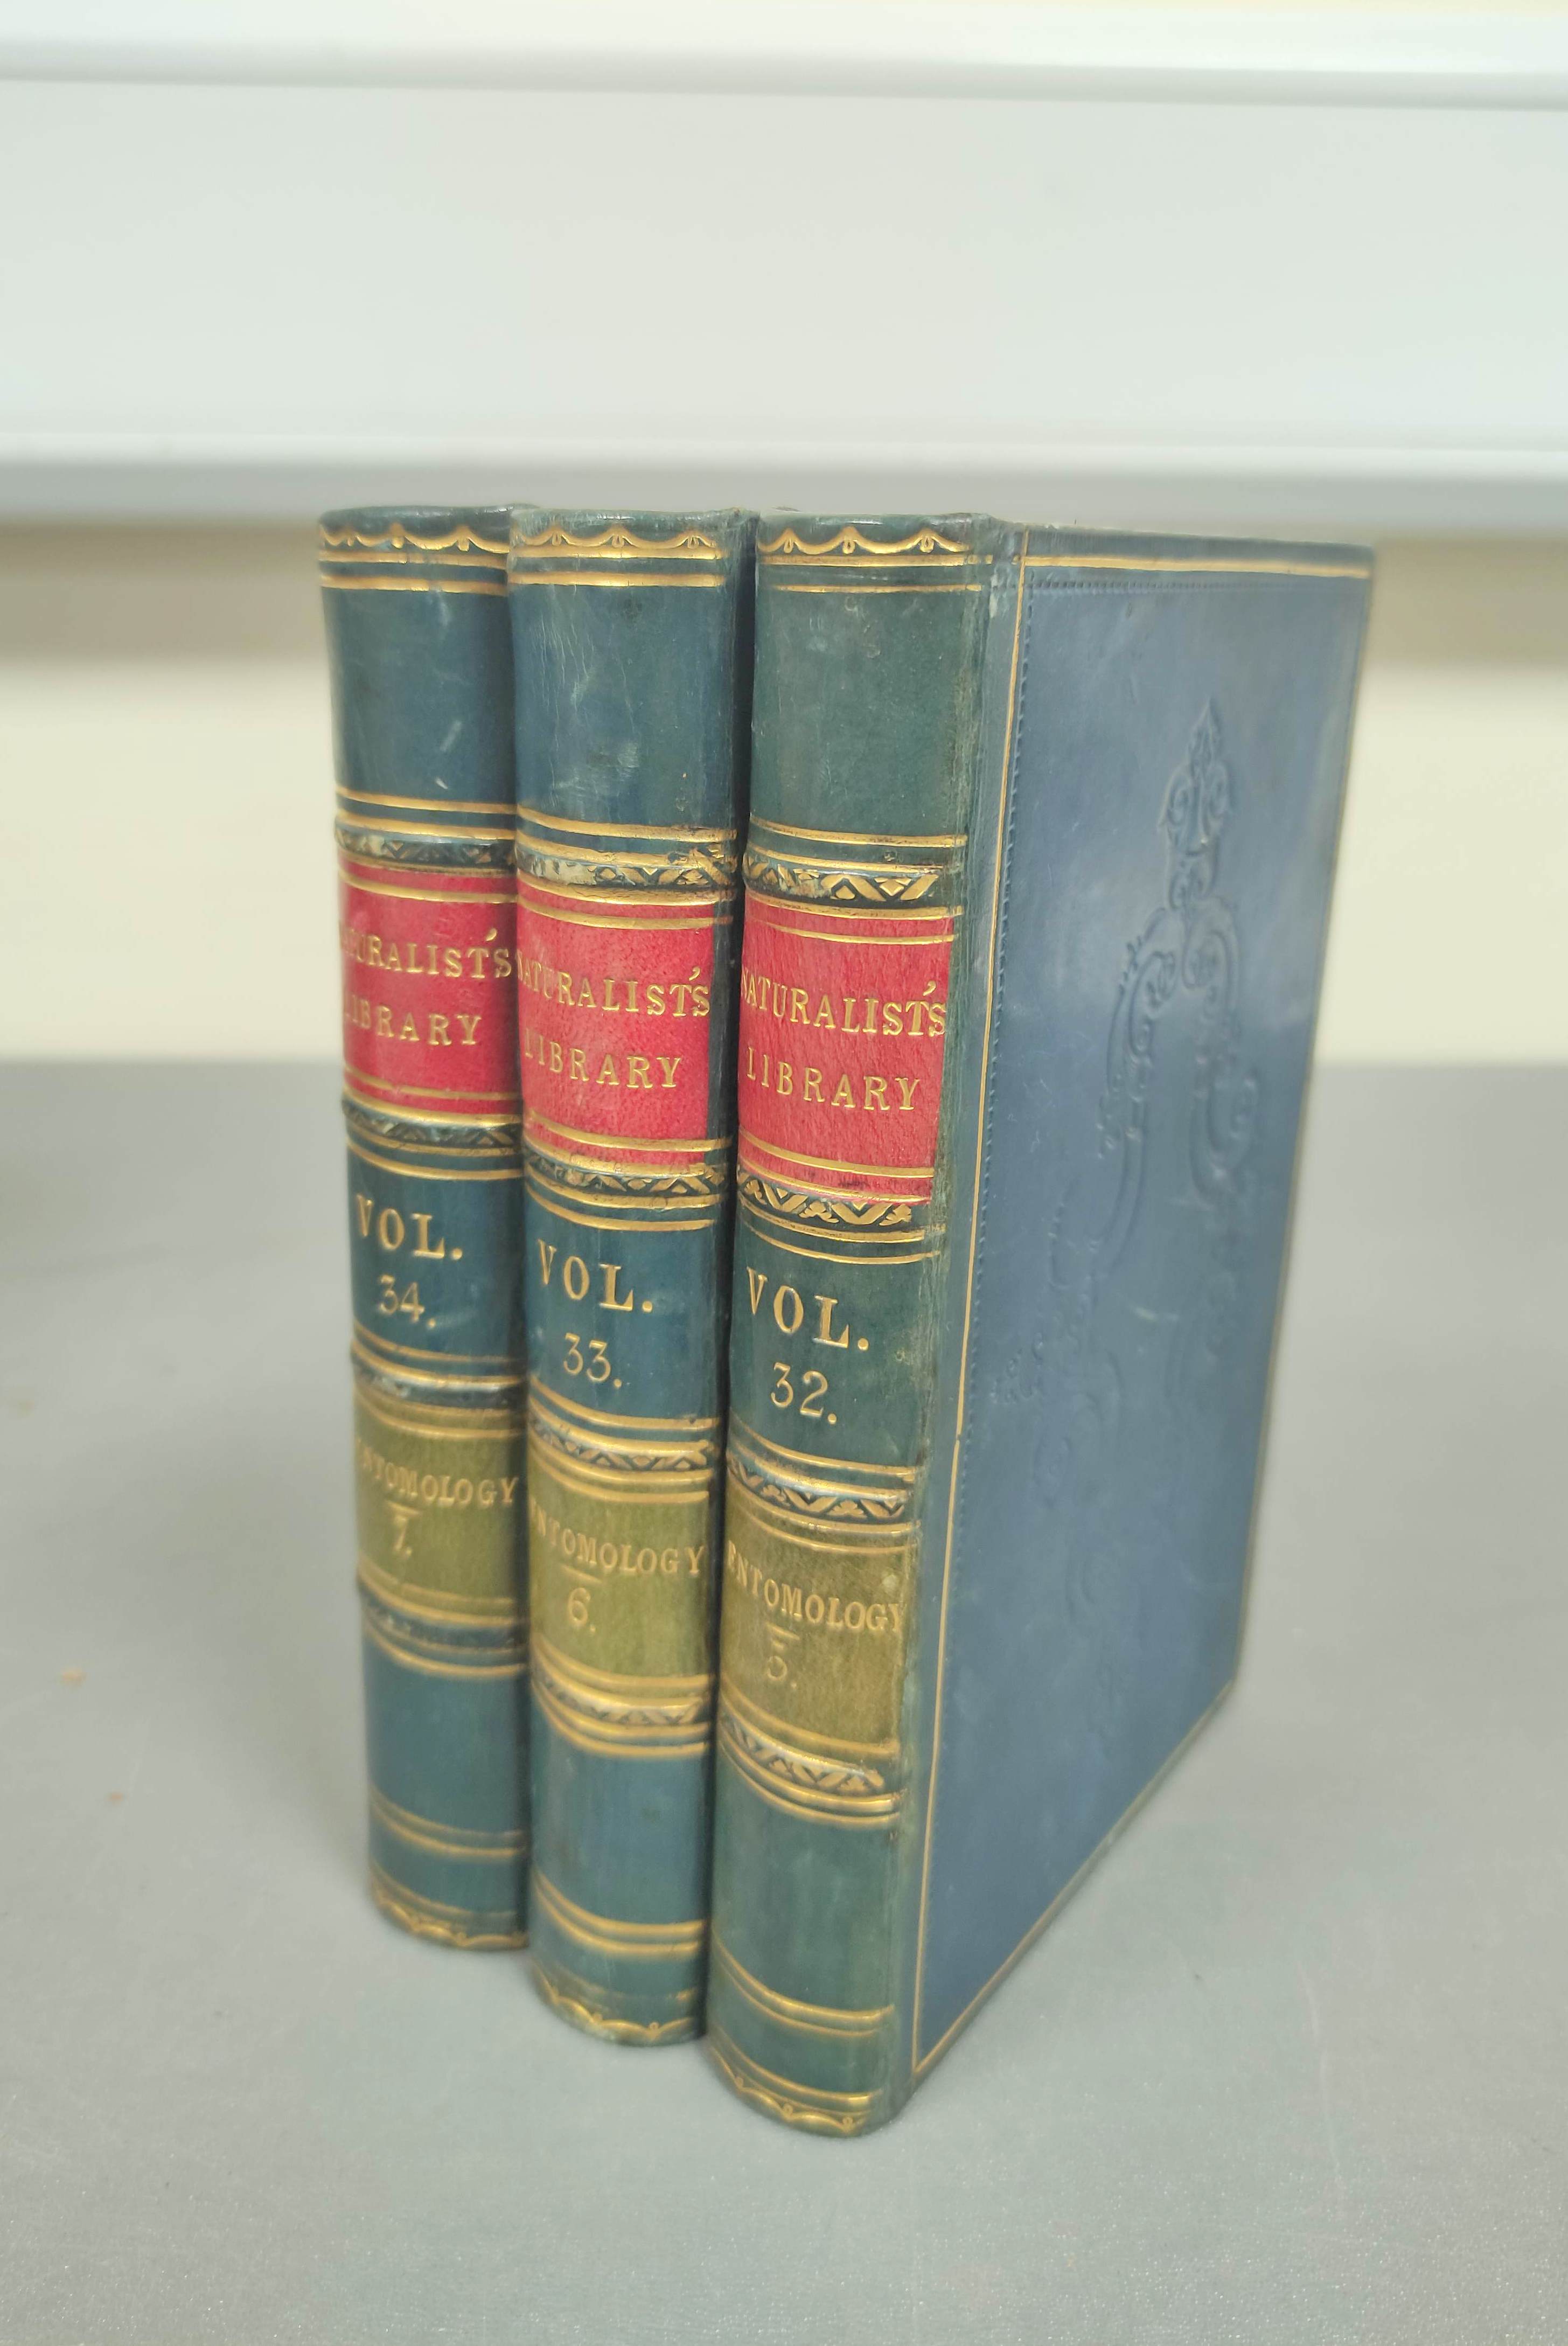 JARDINE SIR WILLIAM.  The Naturalist's Library. Vols. 32, 33 & 34 - Entomology (5, 6 & 7) re. exotic